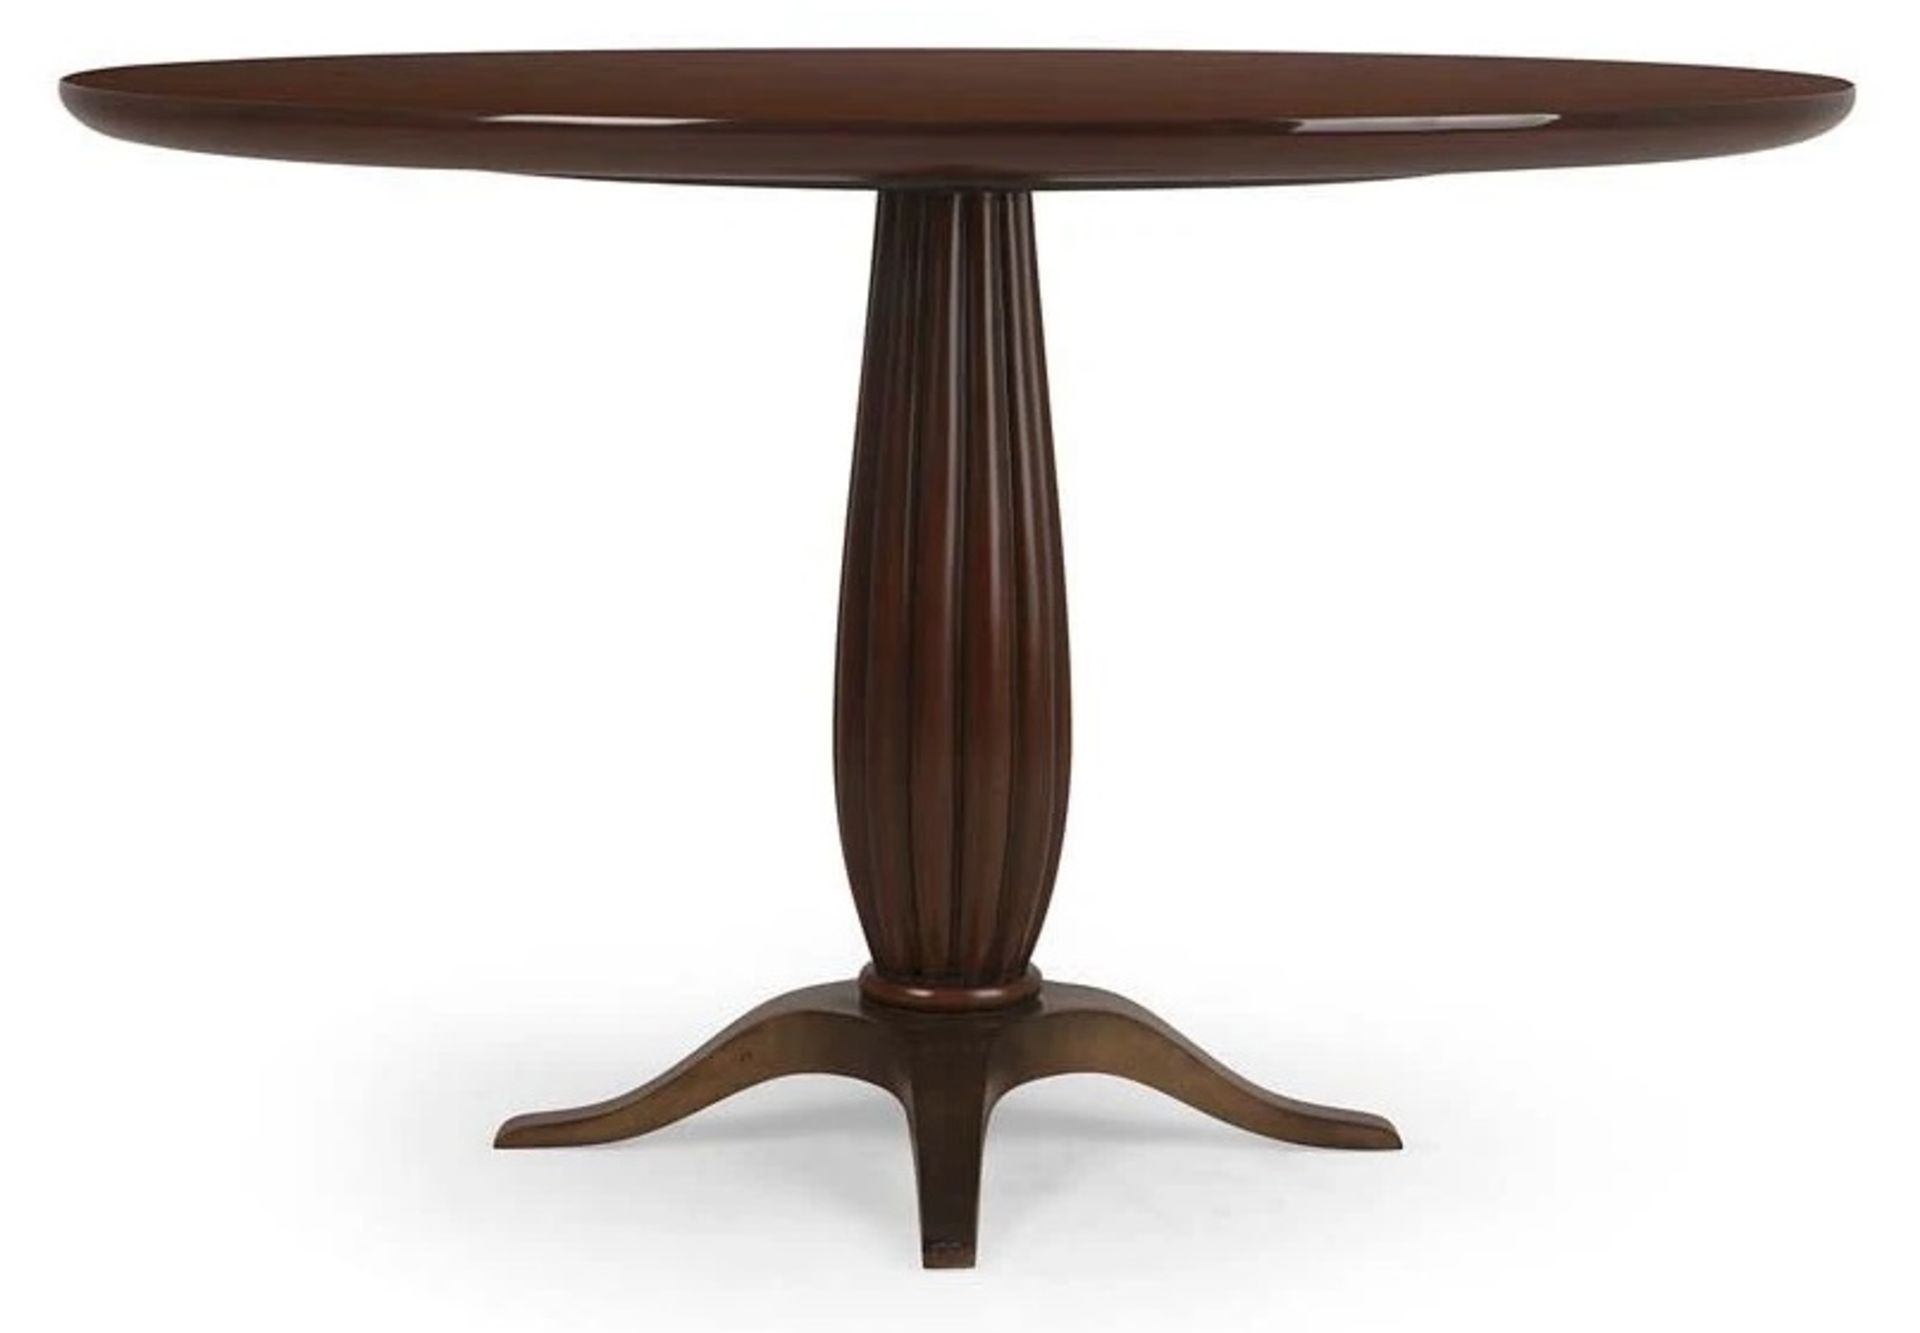 1 x Christopher Guy 'Toulouse' Round Georgian-Style Restaurant Dining Table - Original RRP £4,600.00 - Image 5 of 6